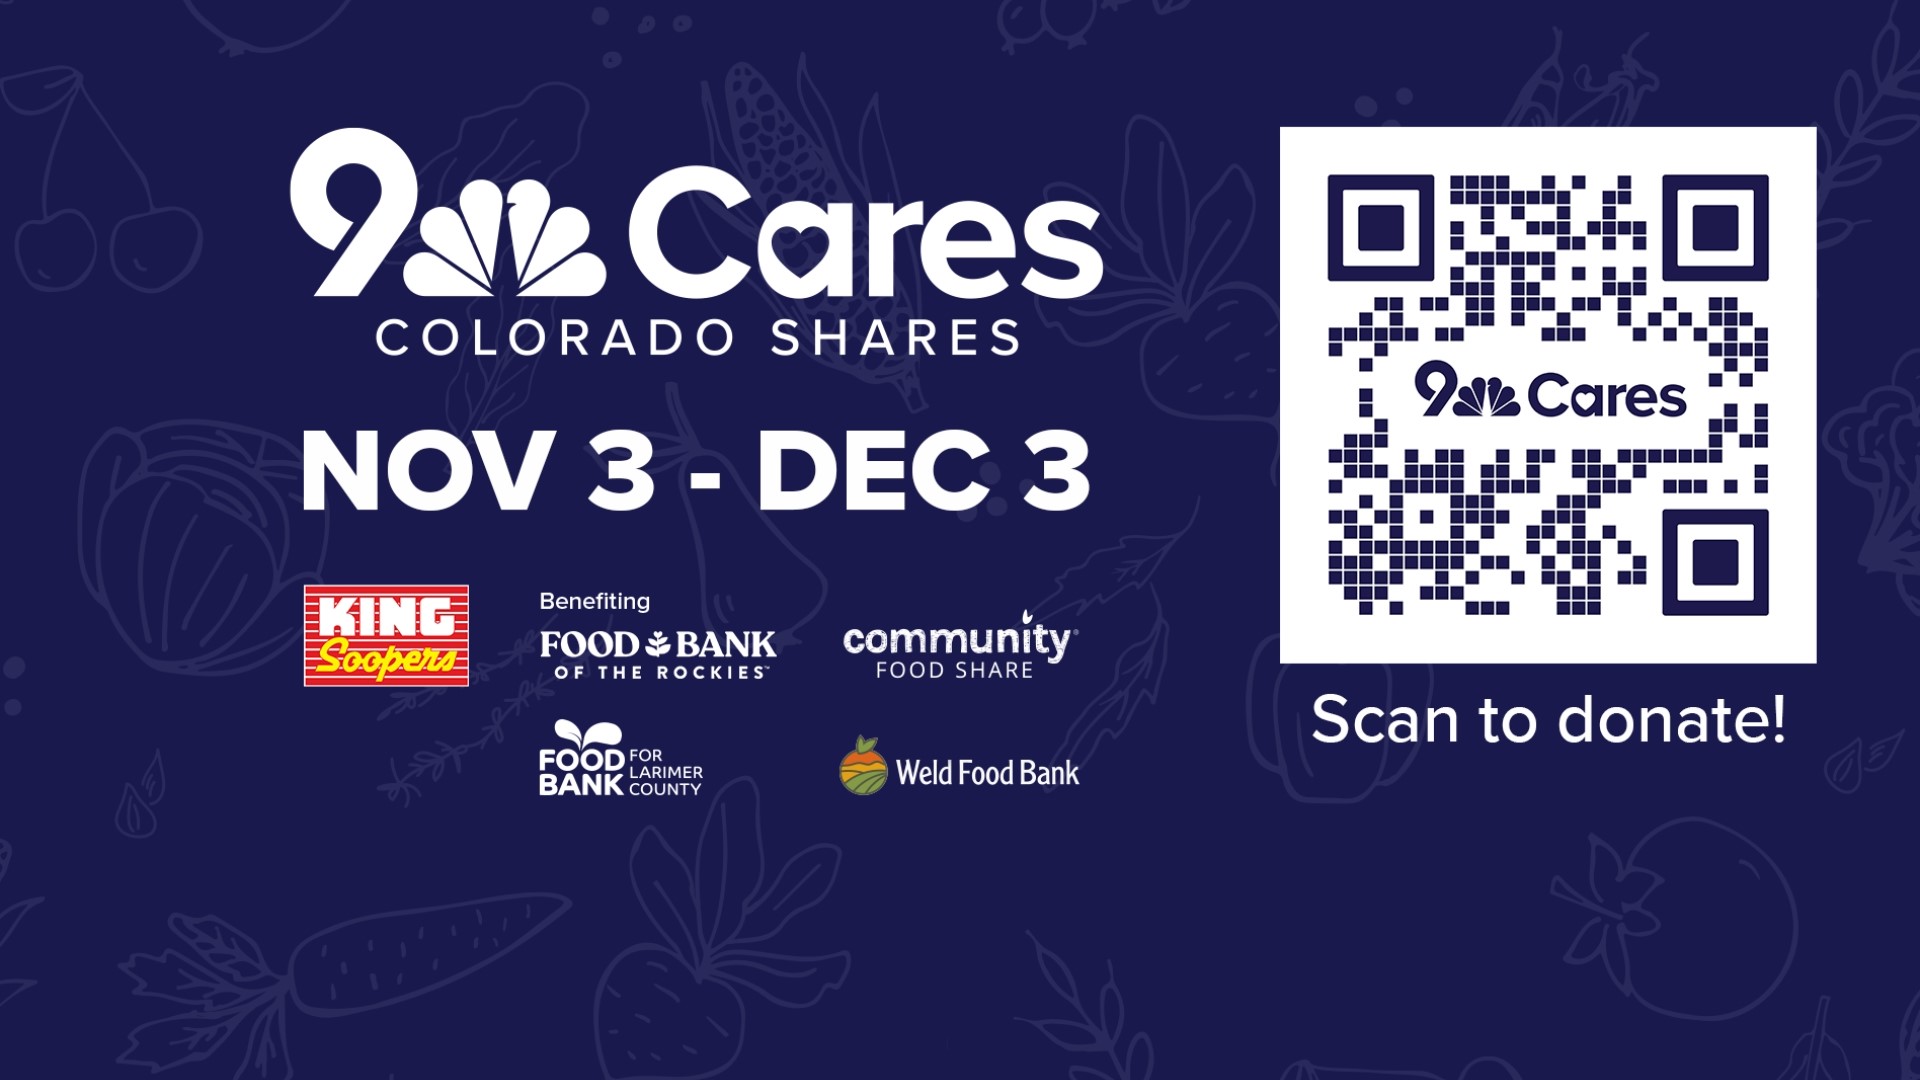 The drive will help support four Colorado food banks: Community Food Share, Food Bank for Larimer County, Food Bank of the Rockies, and Weld Food Bank.